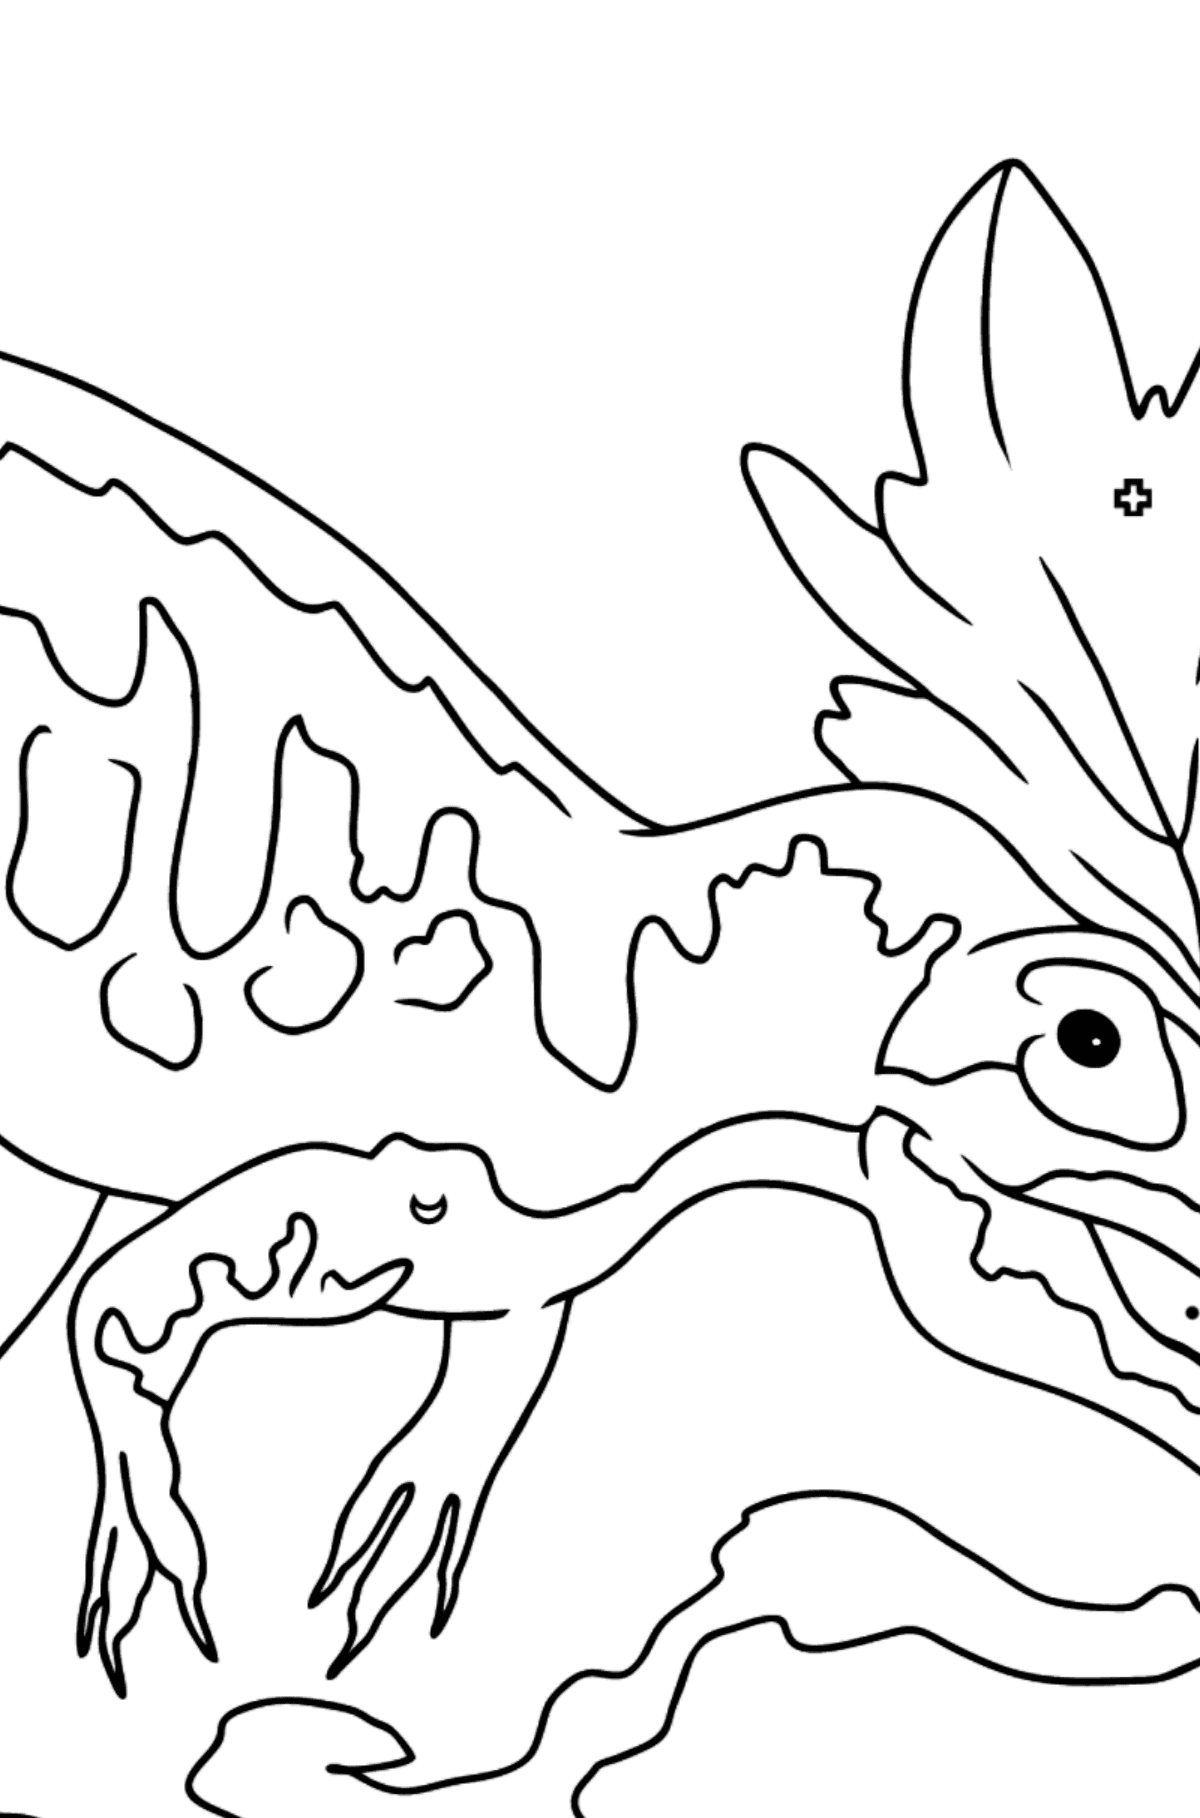 Allosaurus Coloring Page - Coloring by Symbols and Geometric Shapes for Kids